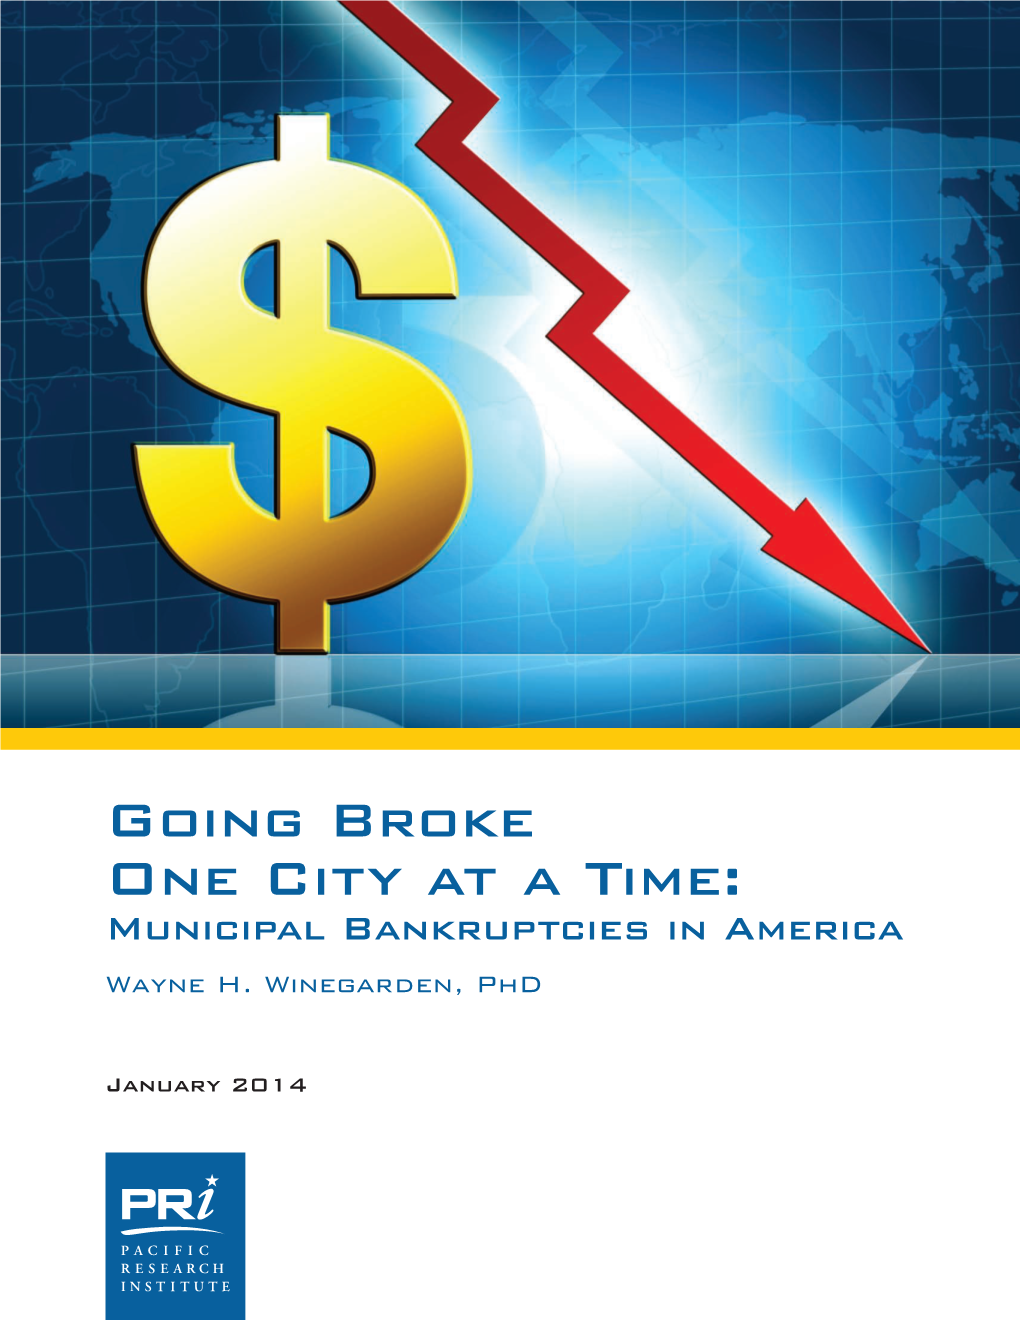 Going Broke One City at a Time: Municipal Bankruptcies in America Wayne H